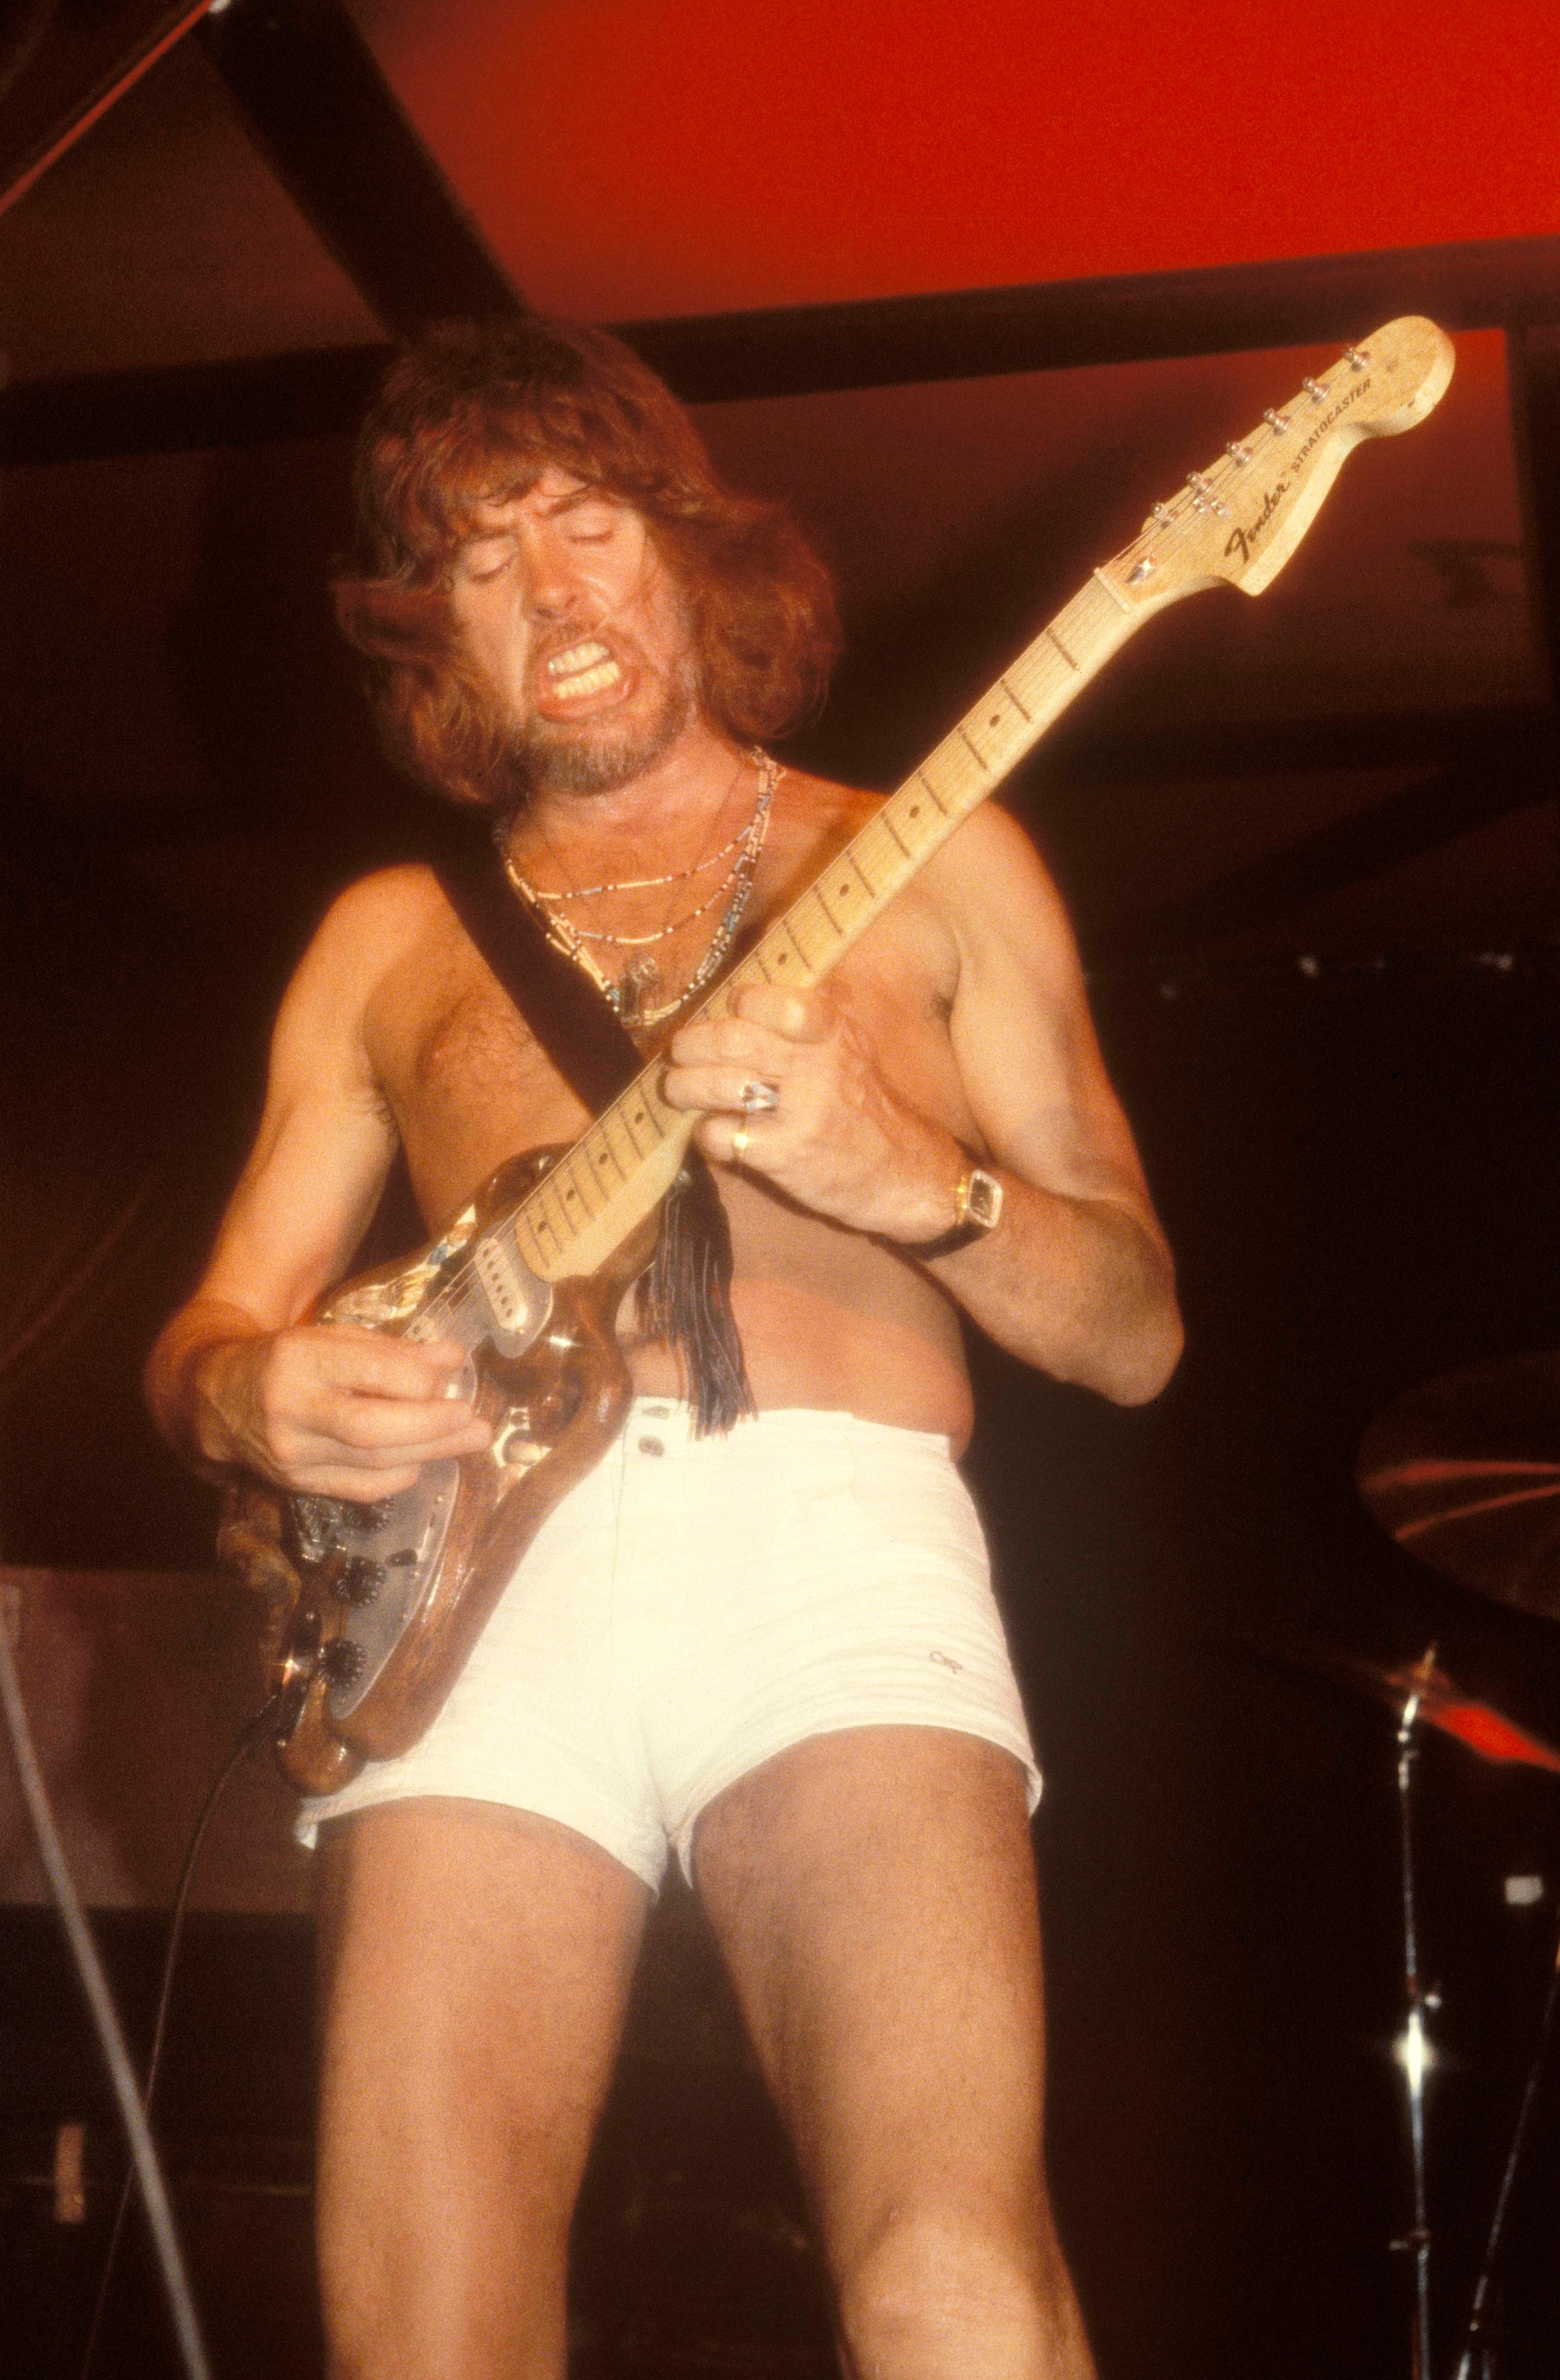 A shirtless John Mayall plays electric guitar on stage